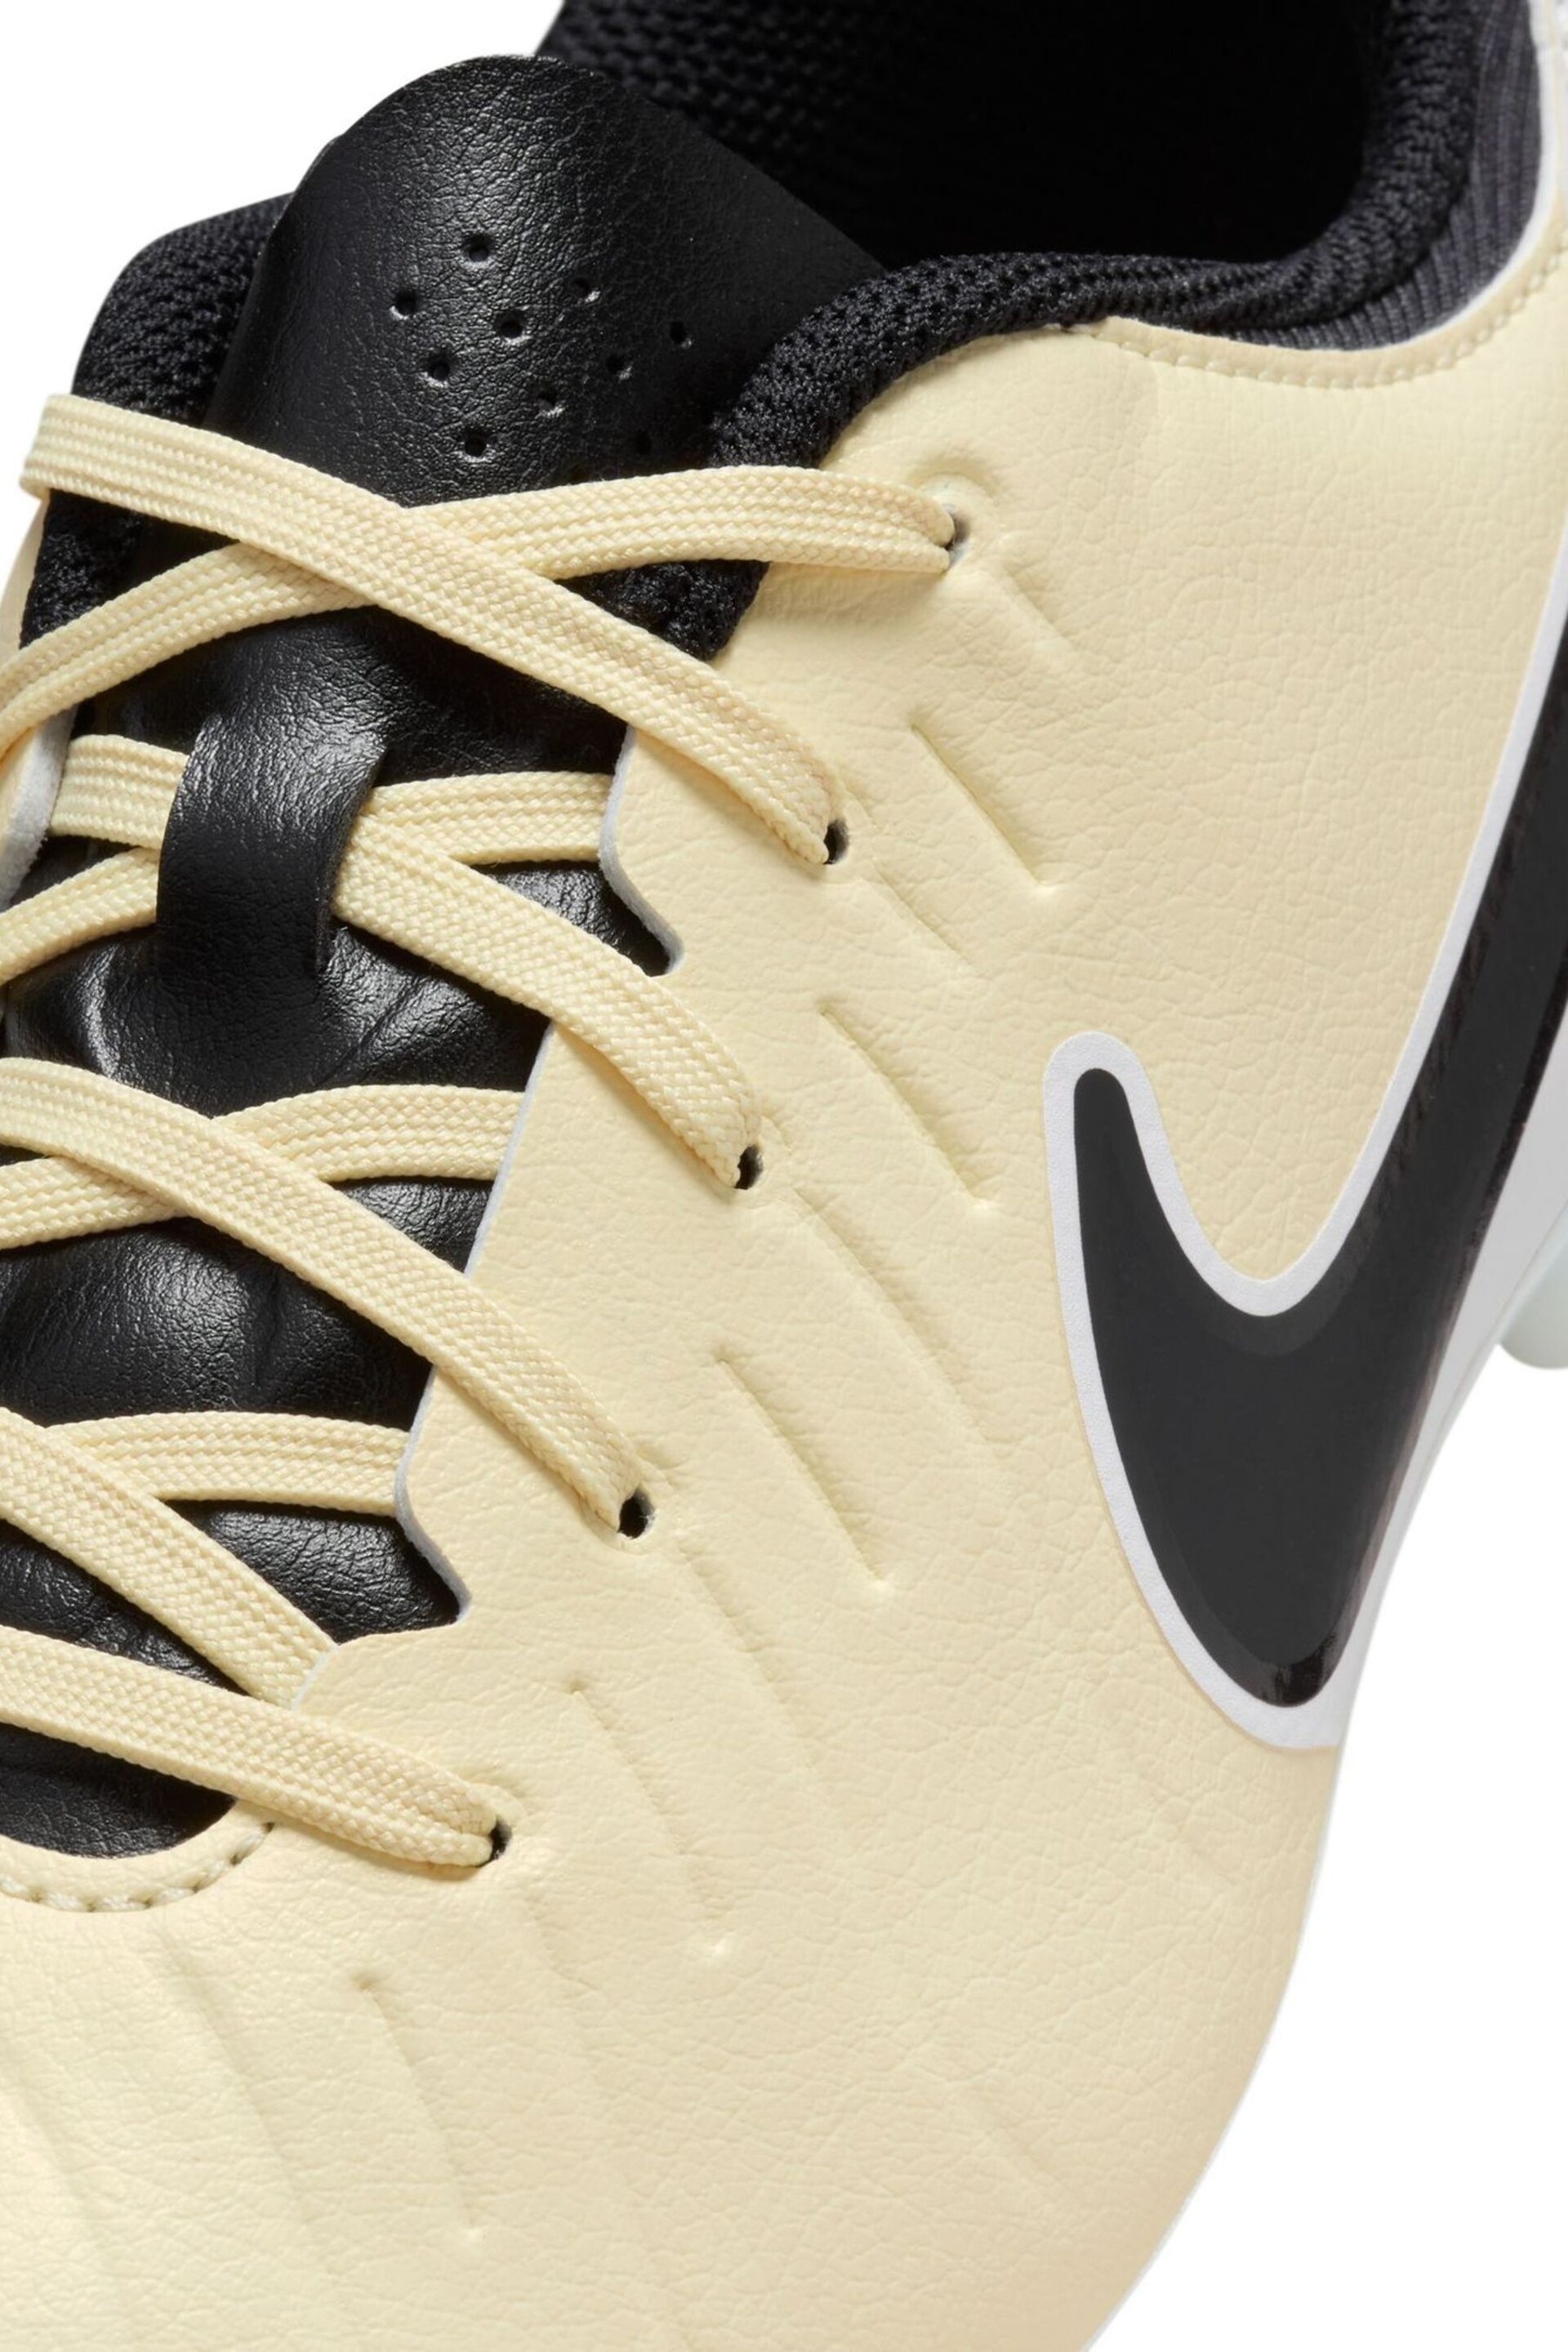 Nike Yellow Jr. Tiempo Legend 10 Academy Multi Ground Football Boots - Image 11 of 11